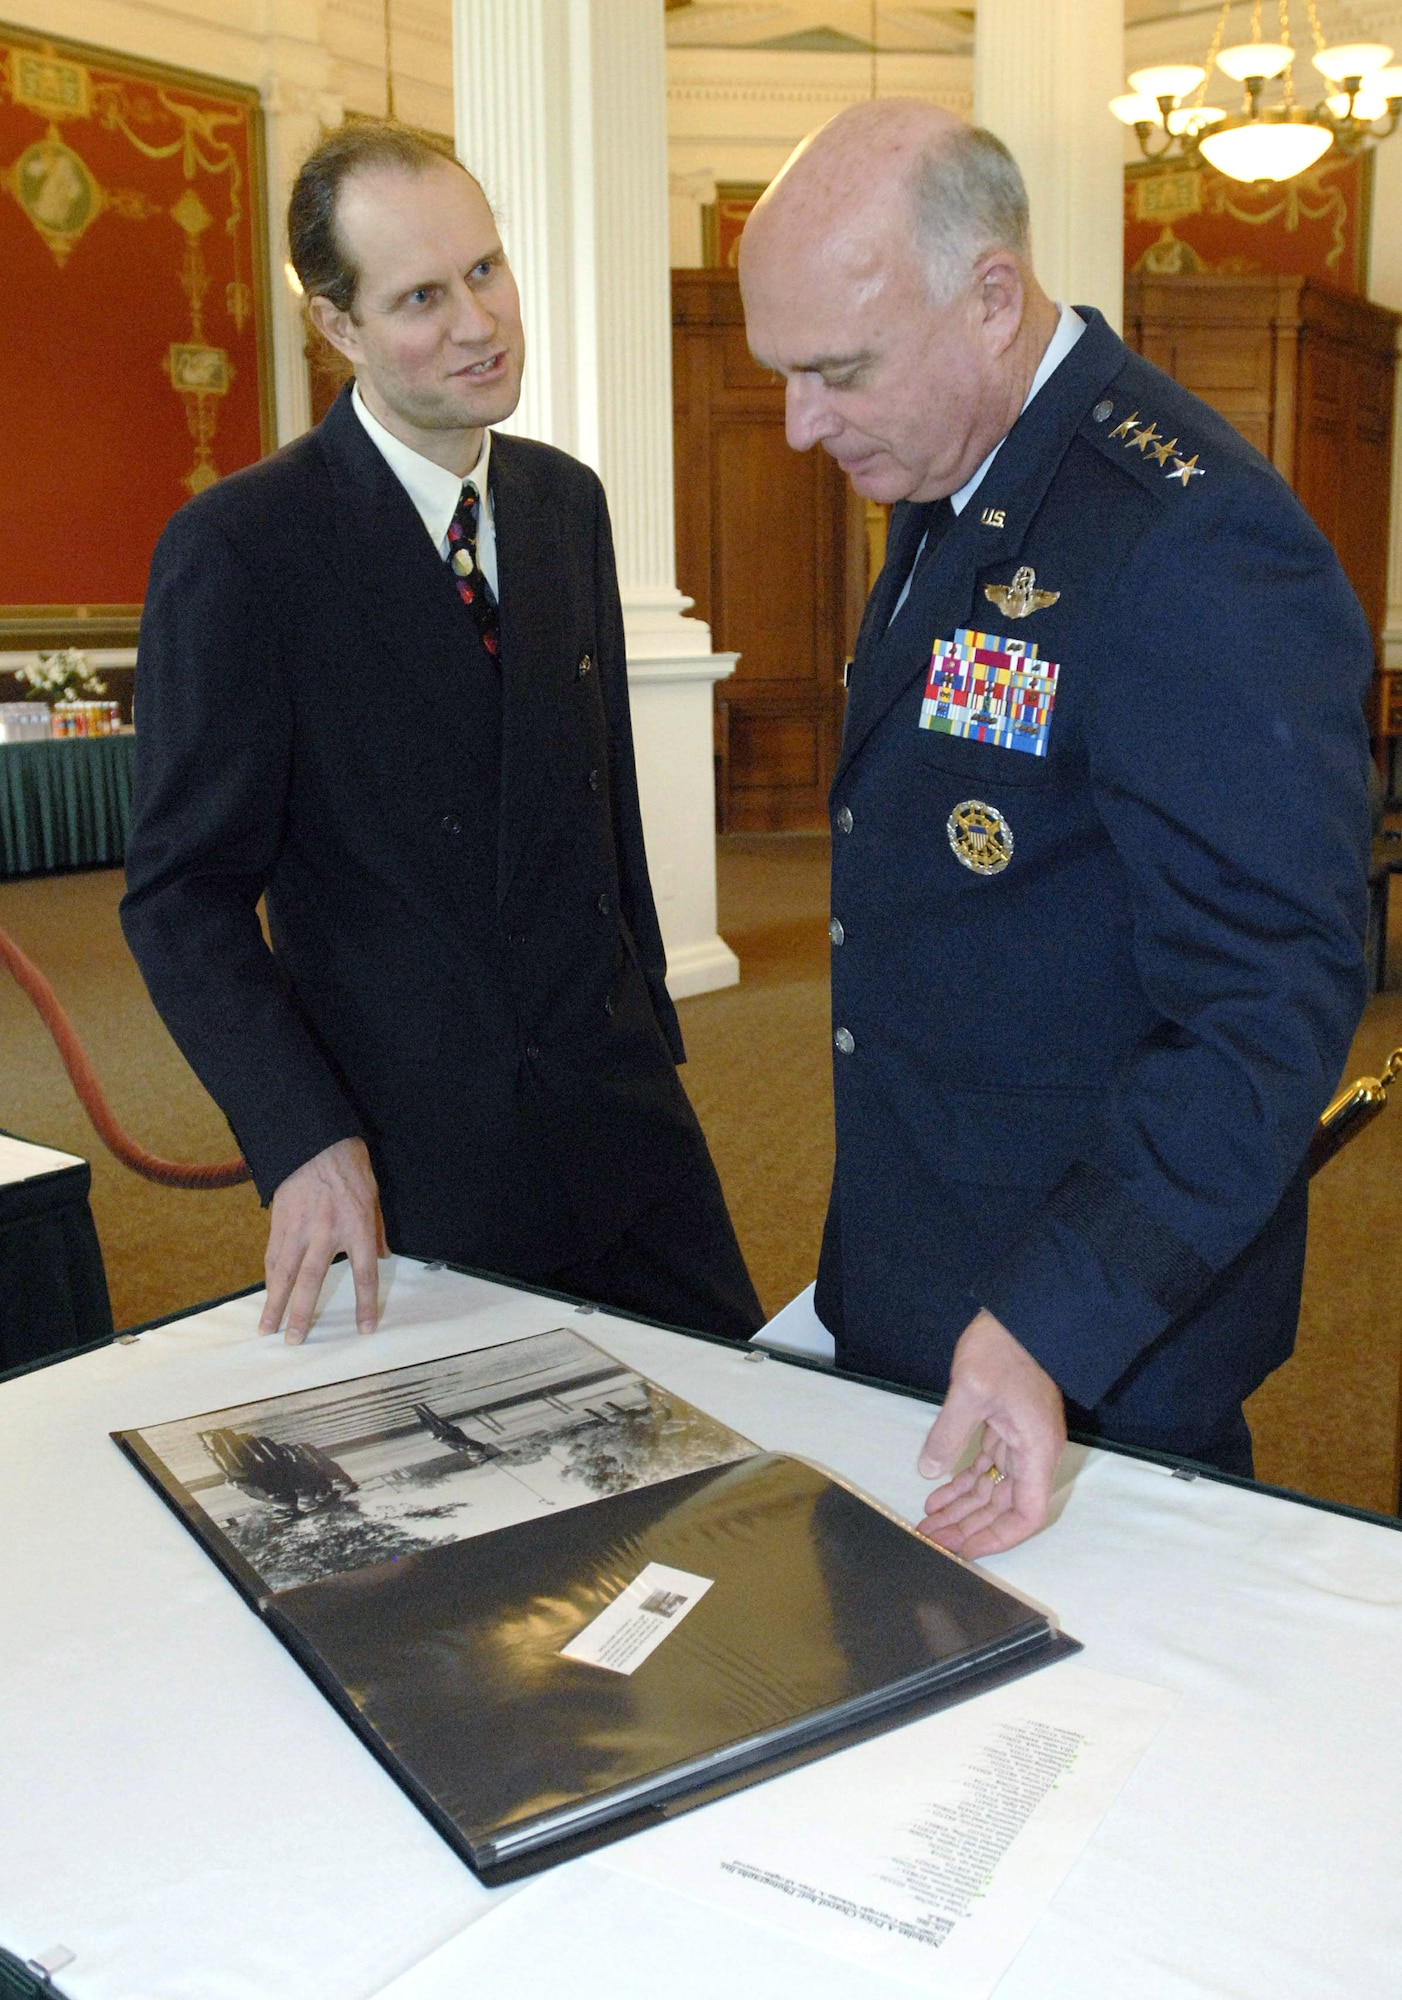 Gen. Carrol H. "Howie" Chandler discusses Air Force imagery with photographer Nicholas Price at the Library of Congress Oct. 6, 2009, in Washington, D.C. The event was the official ceremony welcoming the acquisition of 60 images from the 'Cleared Hot!' Fine Art Photography Collection of the Air Force by Nicholas Price to the library. General Chandler is the Air Force vice chief of staff. (U.S. Air Force photo/Master Sgt. Stan Parker)